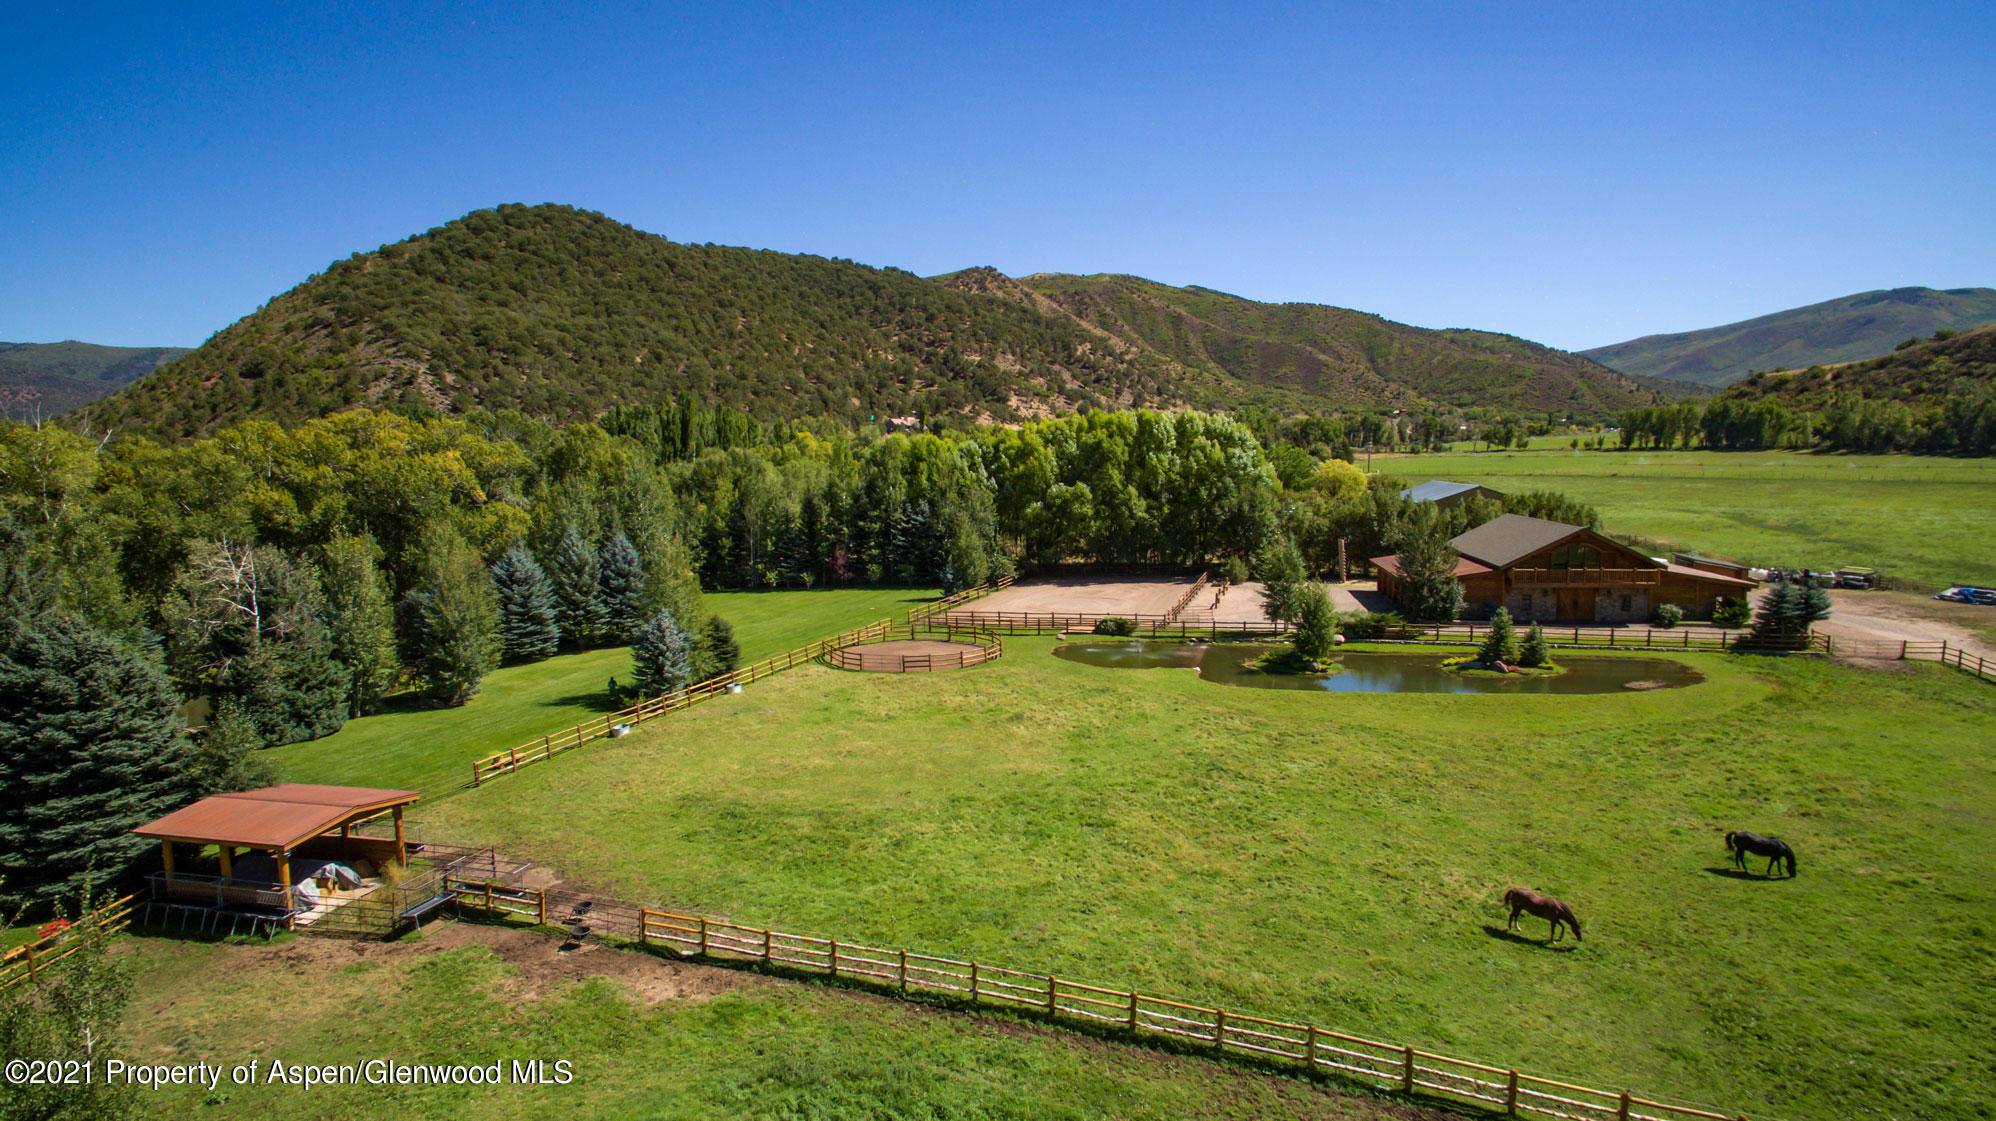 Rancho De Malo is a unique property with ultimate seclusion and privacy.